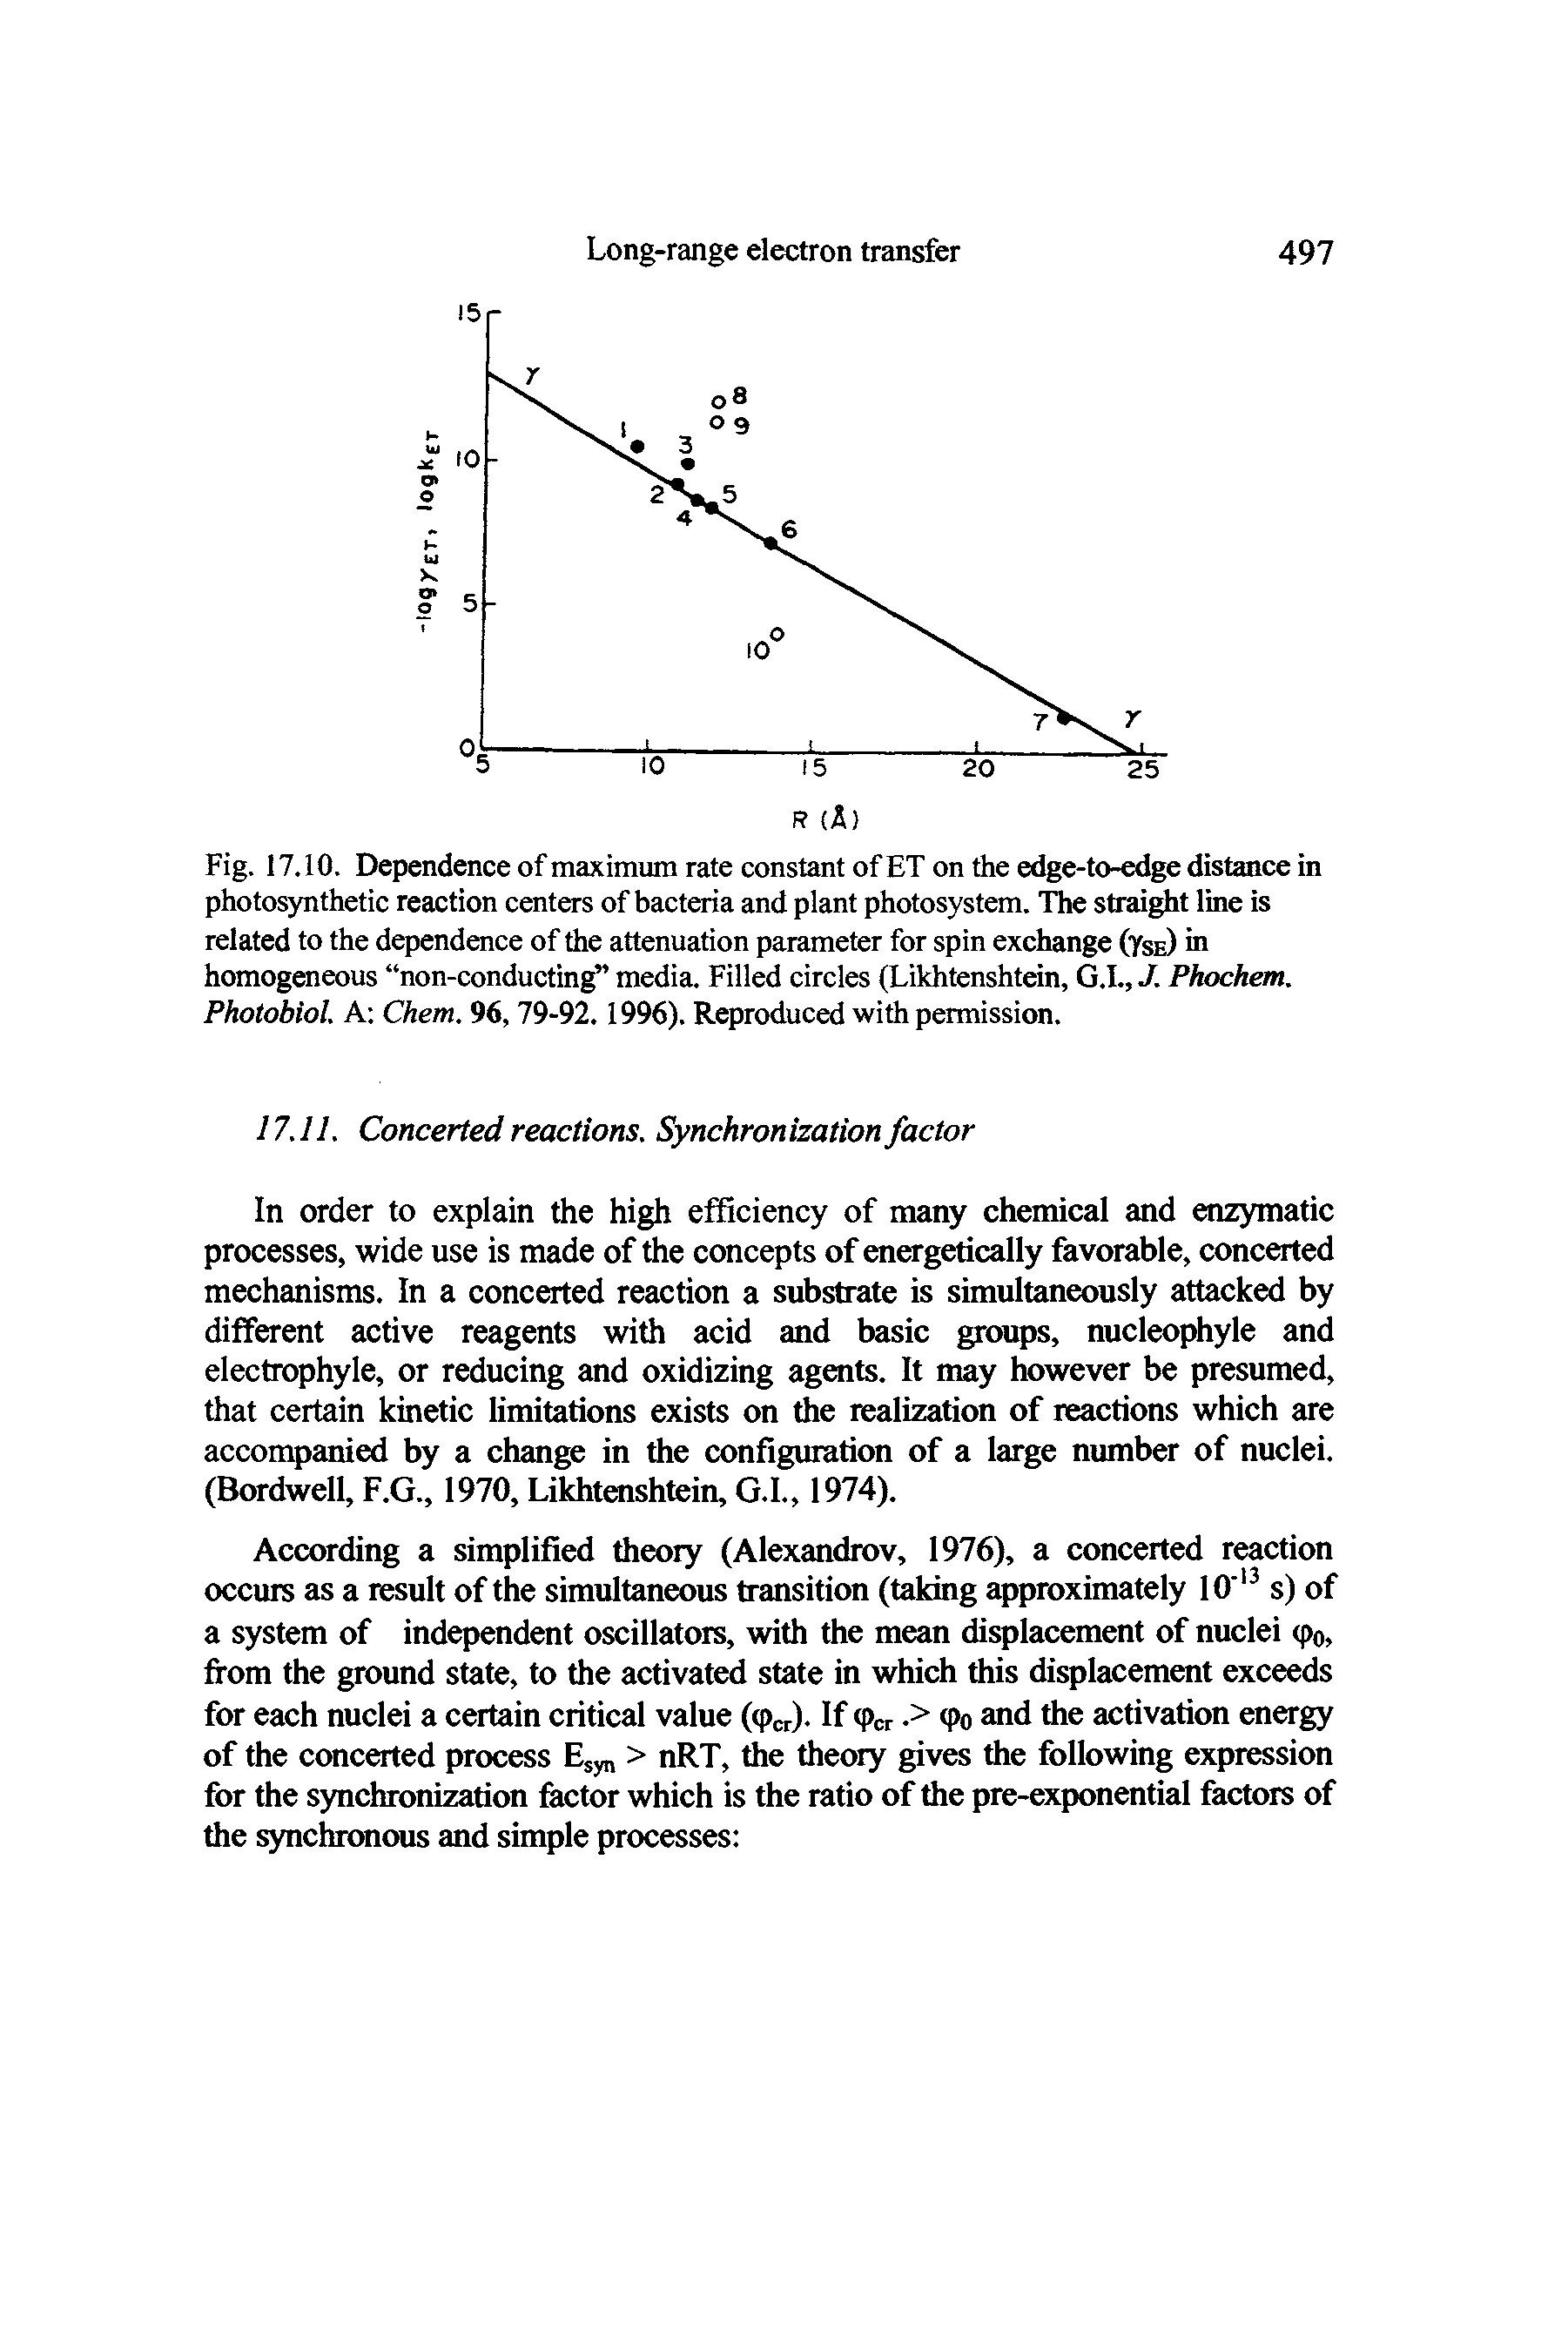 Fig. 17.10. Dependence of maximum rate constant of ET on the edge-to-edge distance in photosynthetic reaction centers of bacteria and plant photosystem. The strai t line is related to the dependence of the attenuation parameter for spin exchange (Yse) in homogeneous non-conducting media. Filled circles (Likhtenshteln, G.I., J. Phochem. Photobiol. A Chem. 96, 79-92.1996). Reproduced with permission.